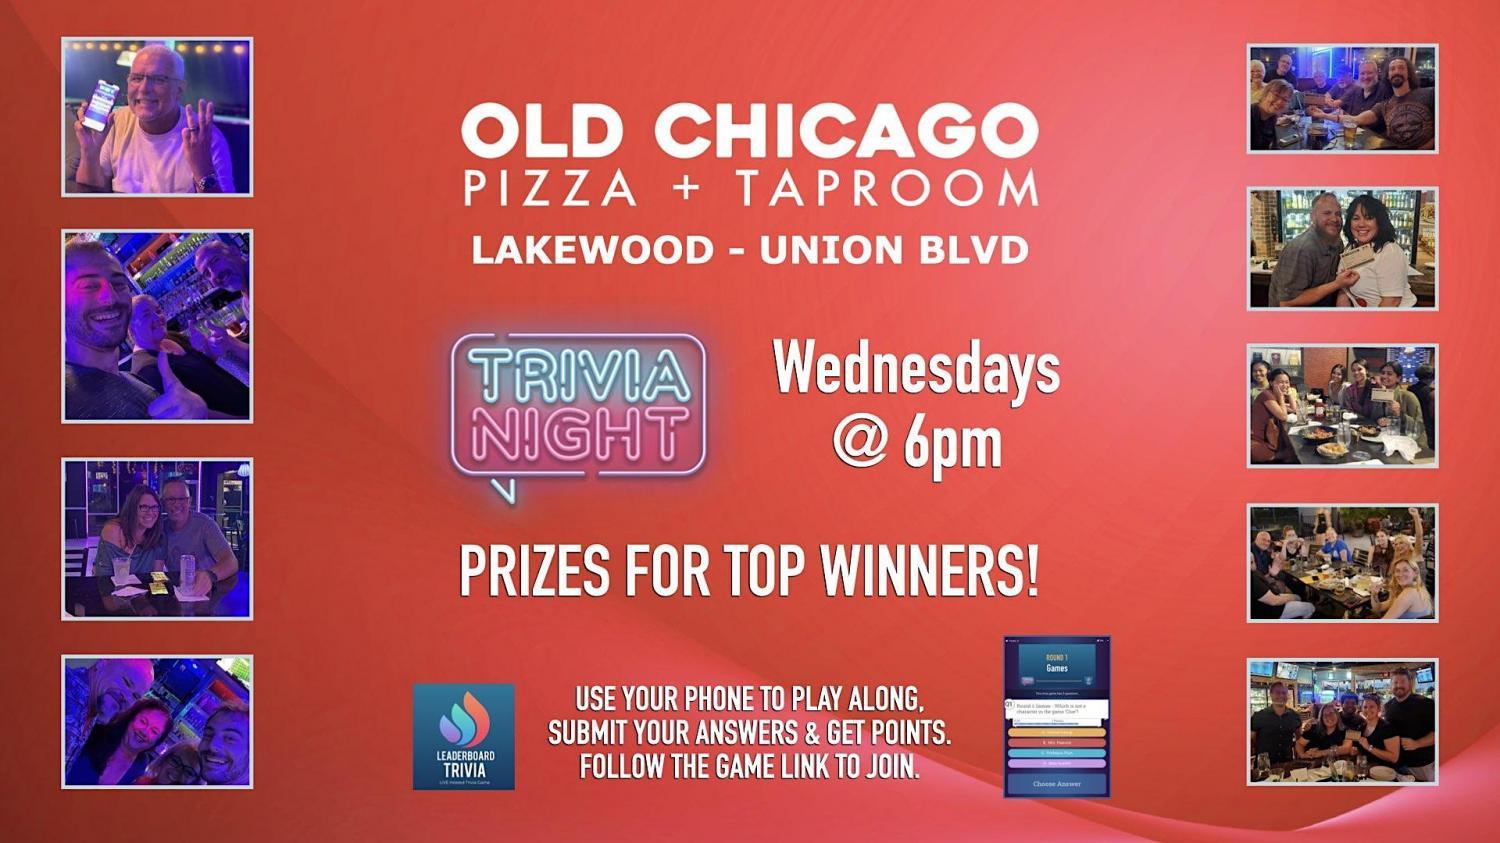 Old Chicago - Union BLVD Lakewood CO | Leaderboard Trivia Game Night
Wed Dec 28, 6:00 PM - Wed Dec 28, 8:00 PM
in 54 days